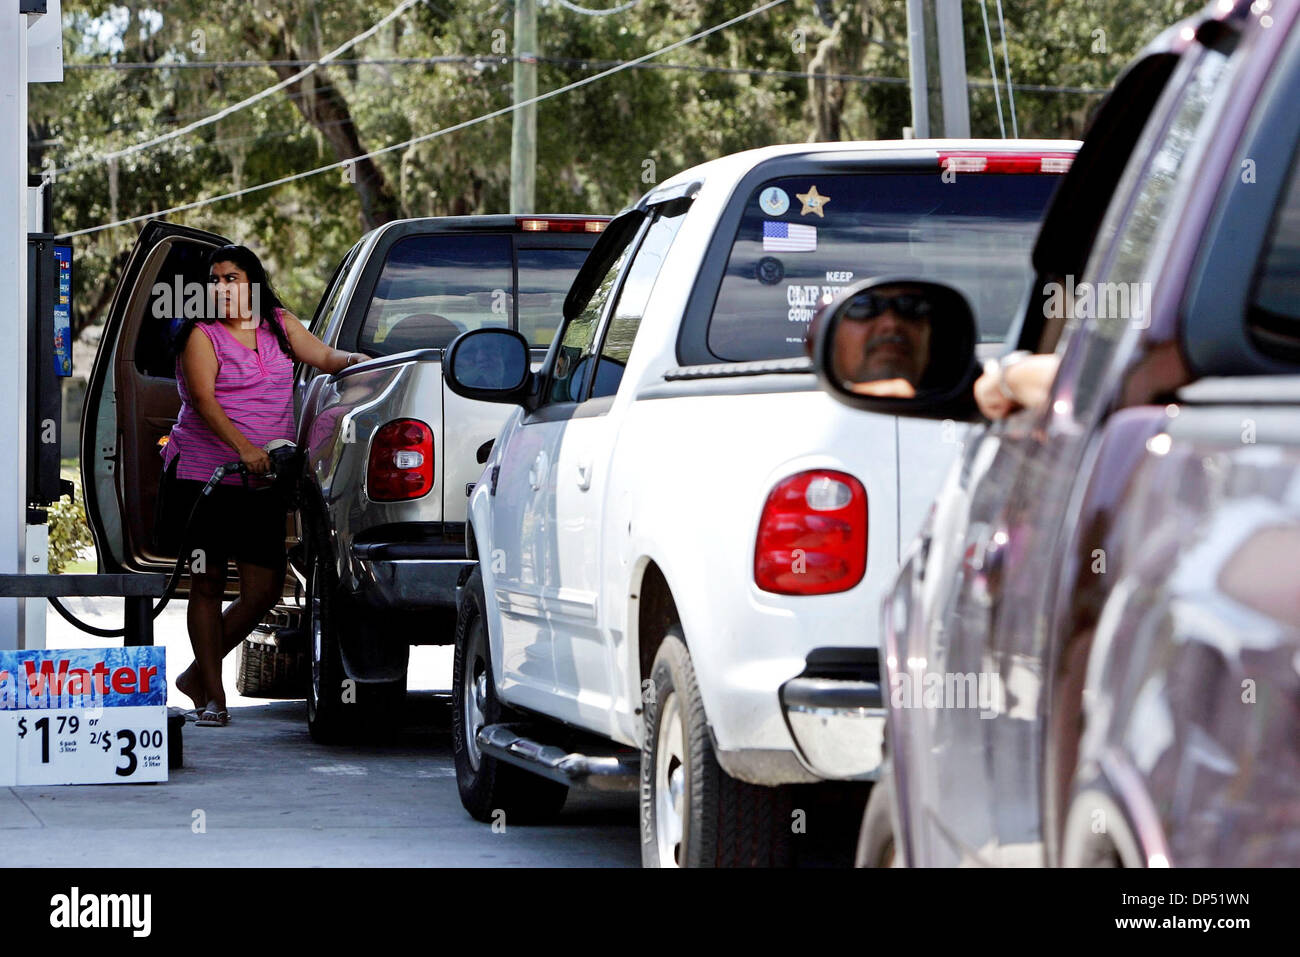 Aug 28, 2006; Okeechobee, FL, USA; Residents and businesses prepare for Hurricane Ernesto. As several trucks wait in line for gas, Isabel Ramos, 26, of Okeechobee pumps her truck full of gas at Murphy USA in Okeechobee Monday afternoon. She's nervous because she'll be staying in her mobile home for the storm.  Mandatory Credit: Photo by Libby Volgyes/Palm Beach Post/ZUMA Press. (©) Stock Photo